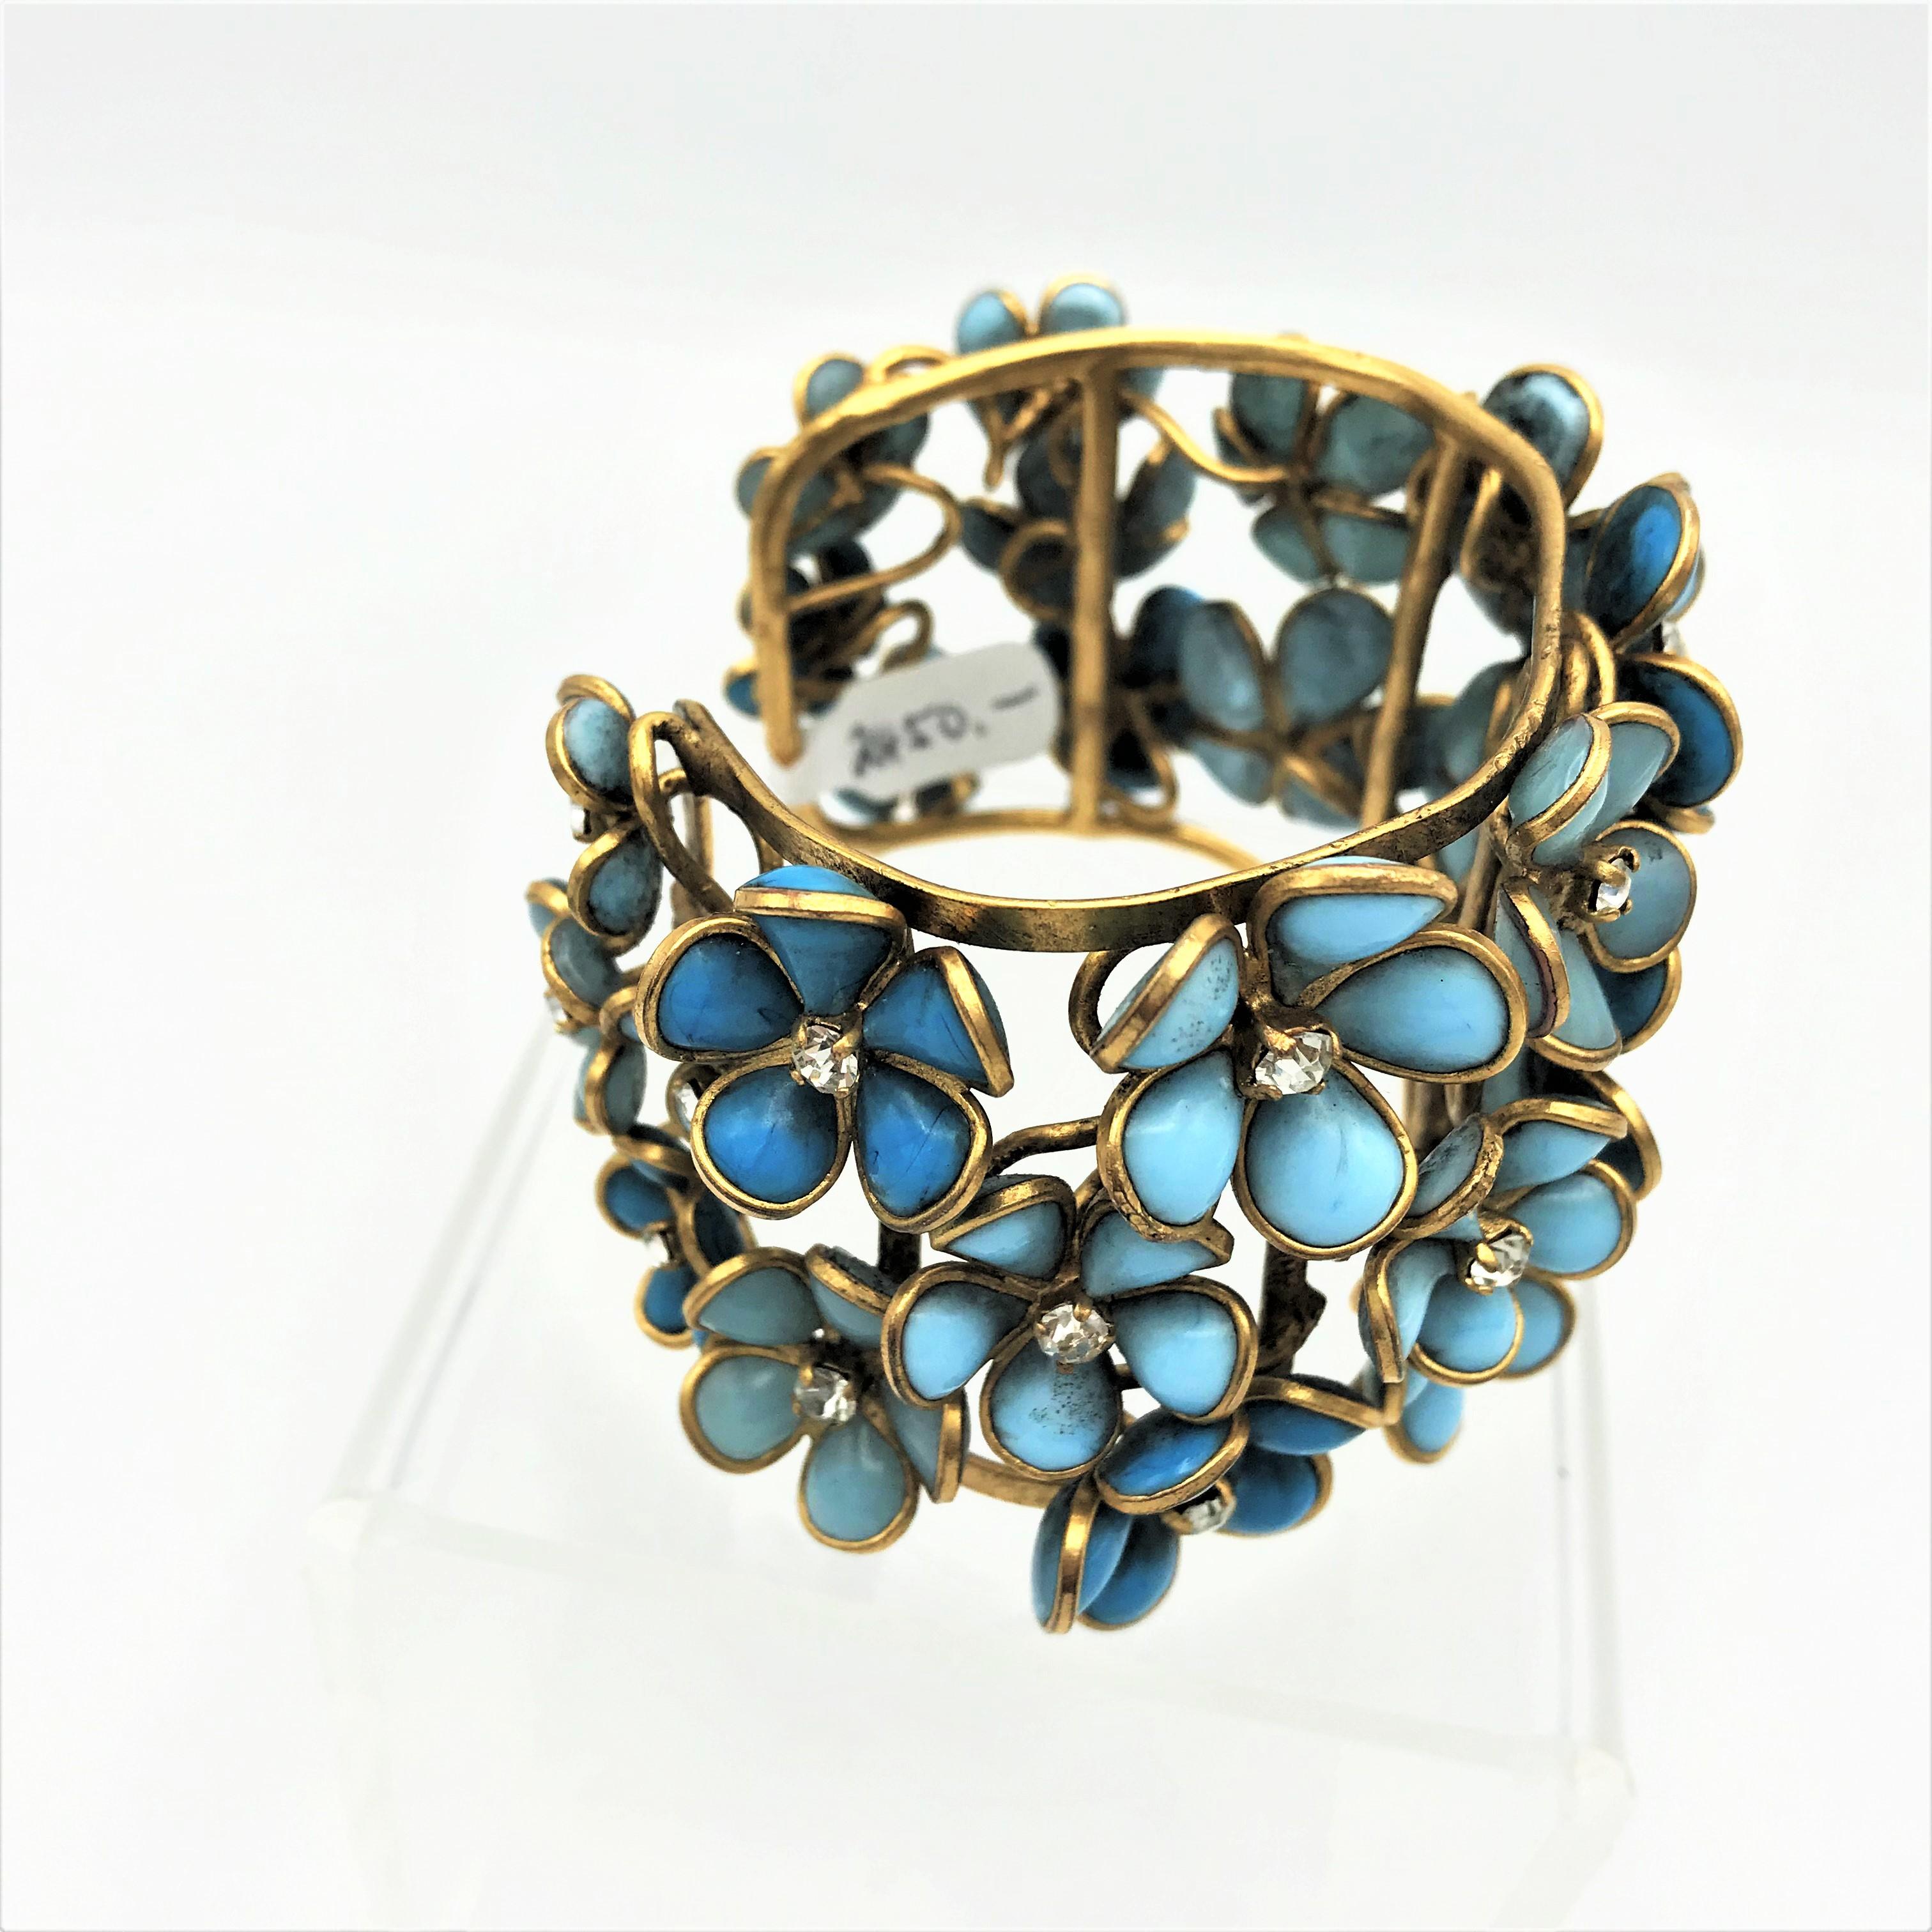 Baguette Cut Flower open bracelet with many Gripoix flowers and rhinestones, gold plated 